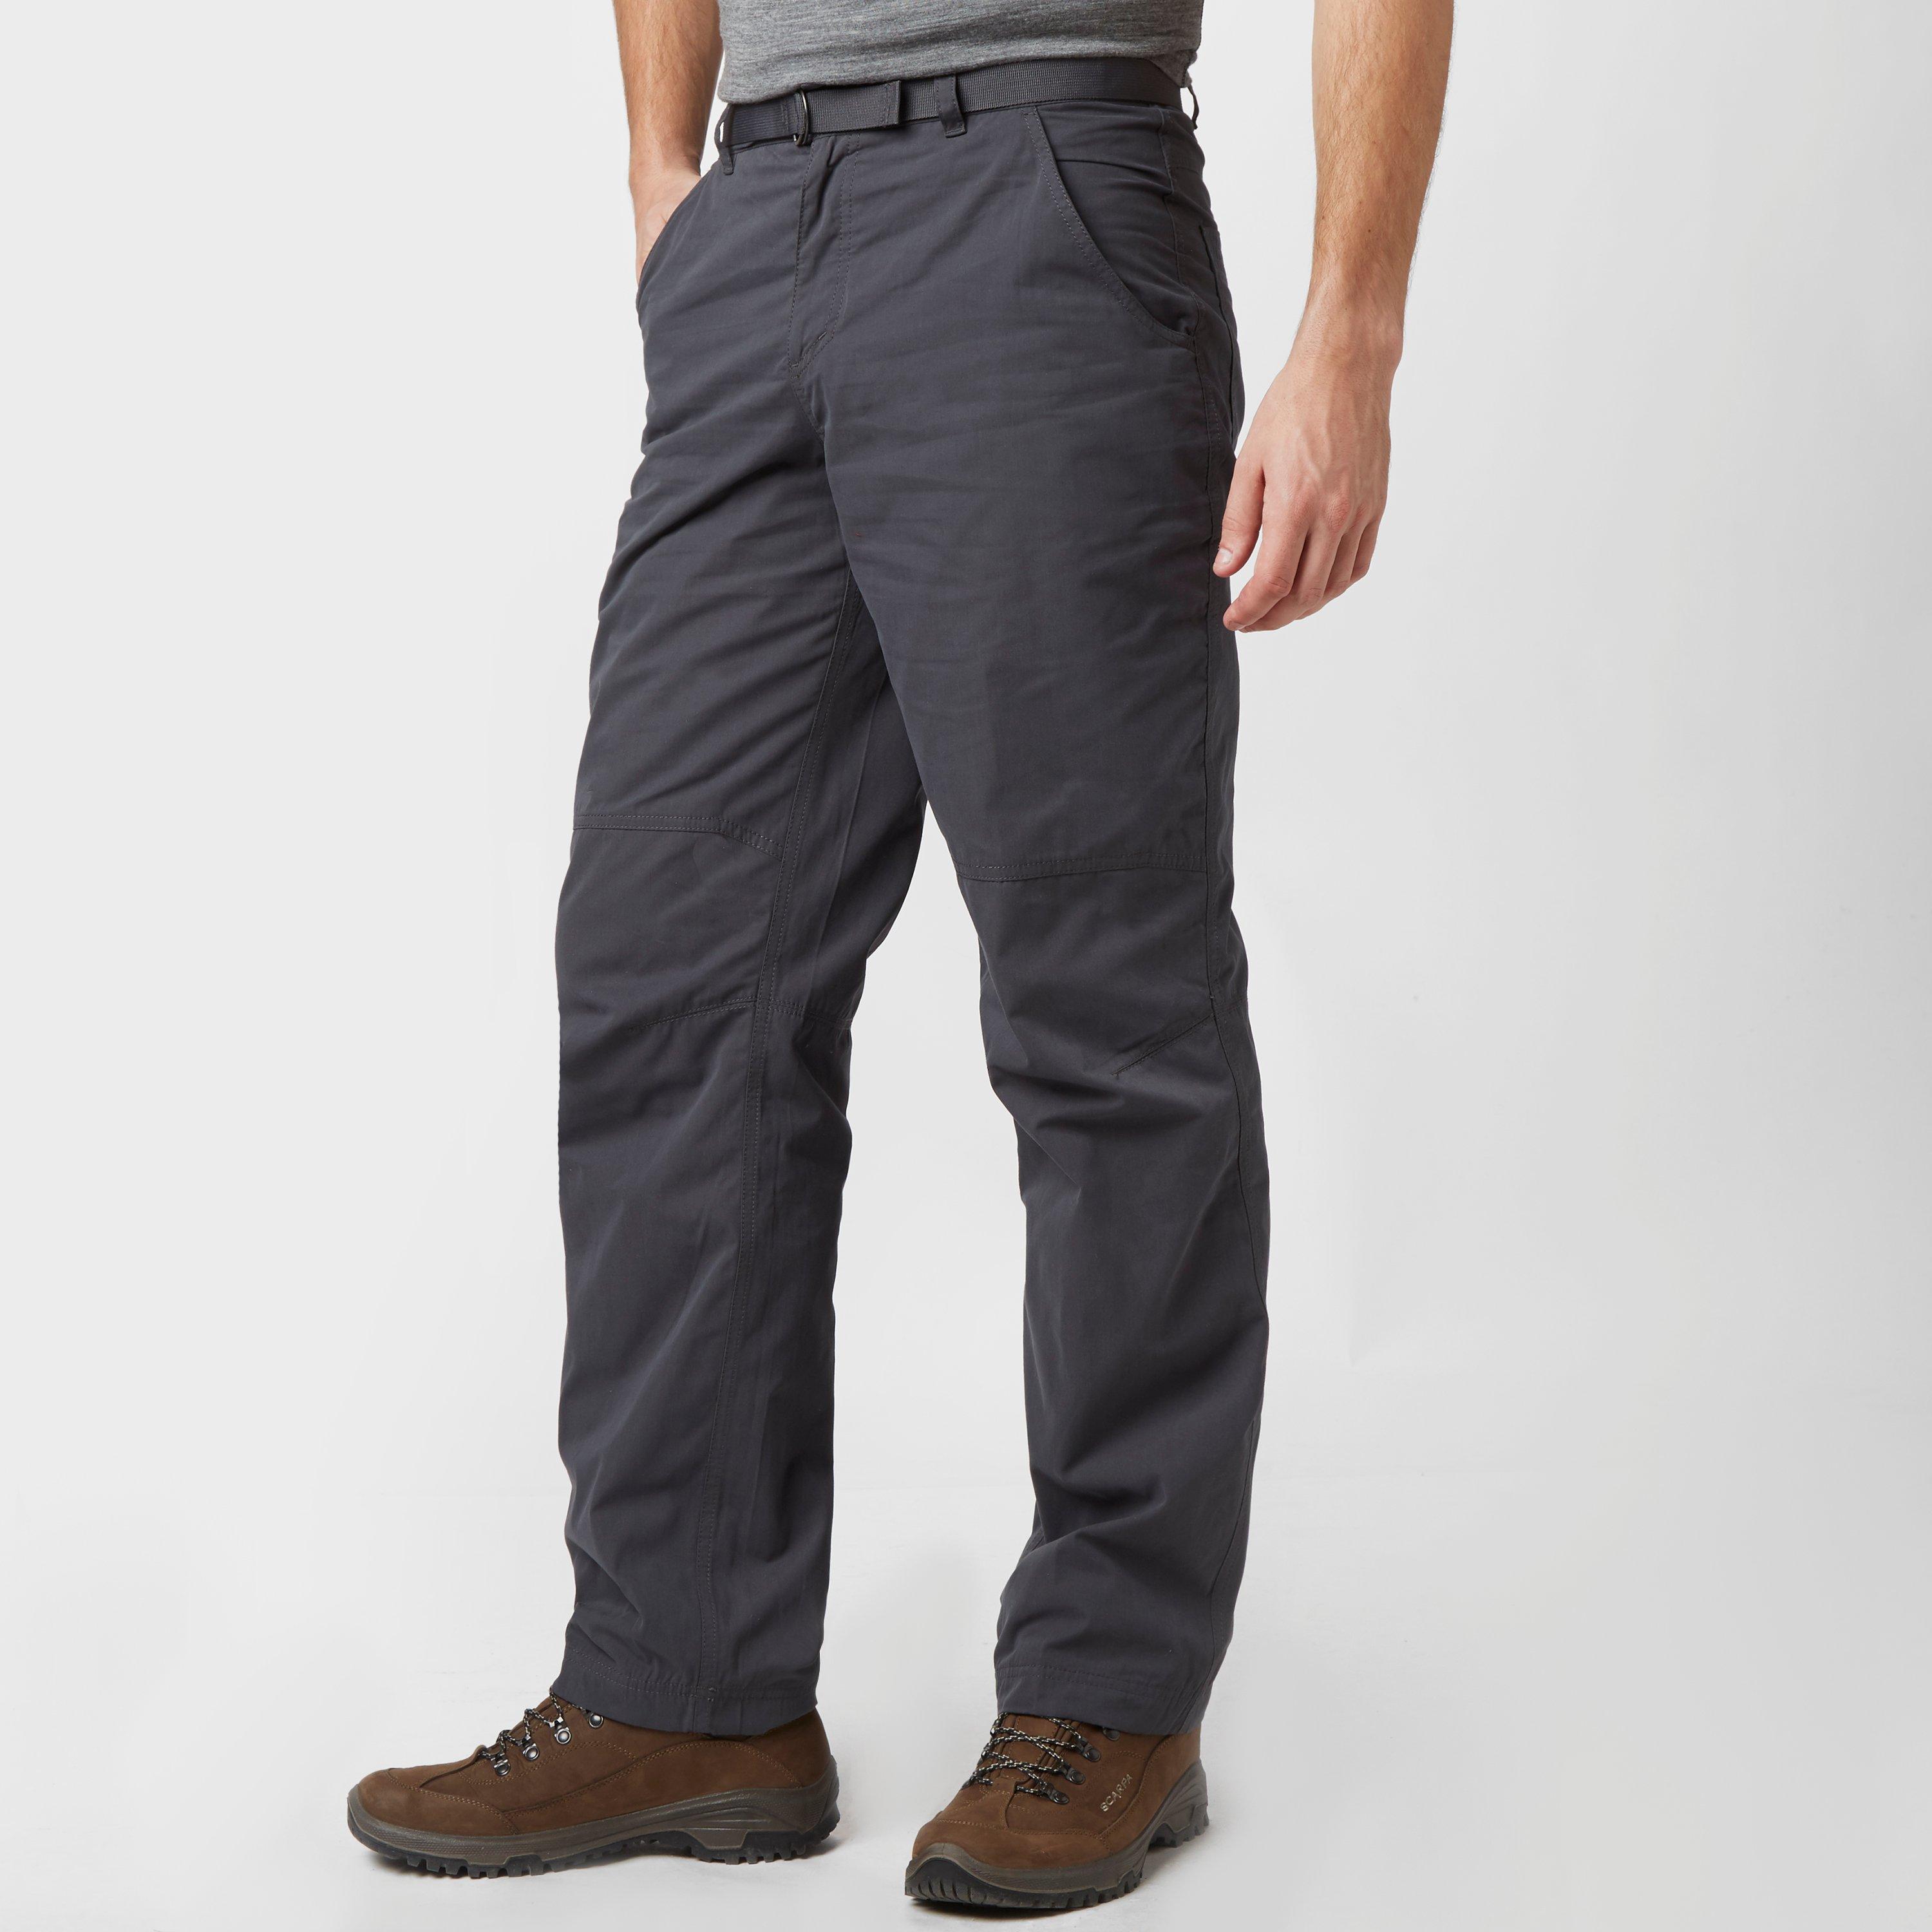 Brasher Men's Grisedale Thermal Trousers - Grey, Grey Review ...